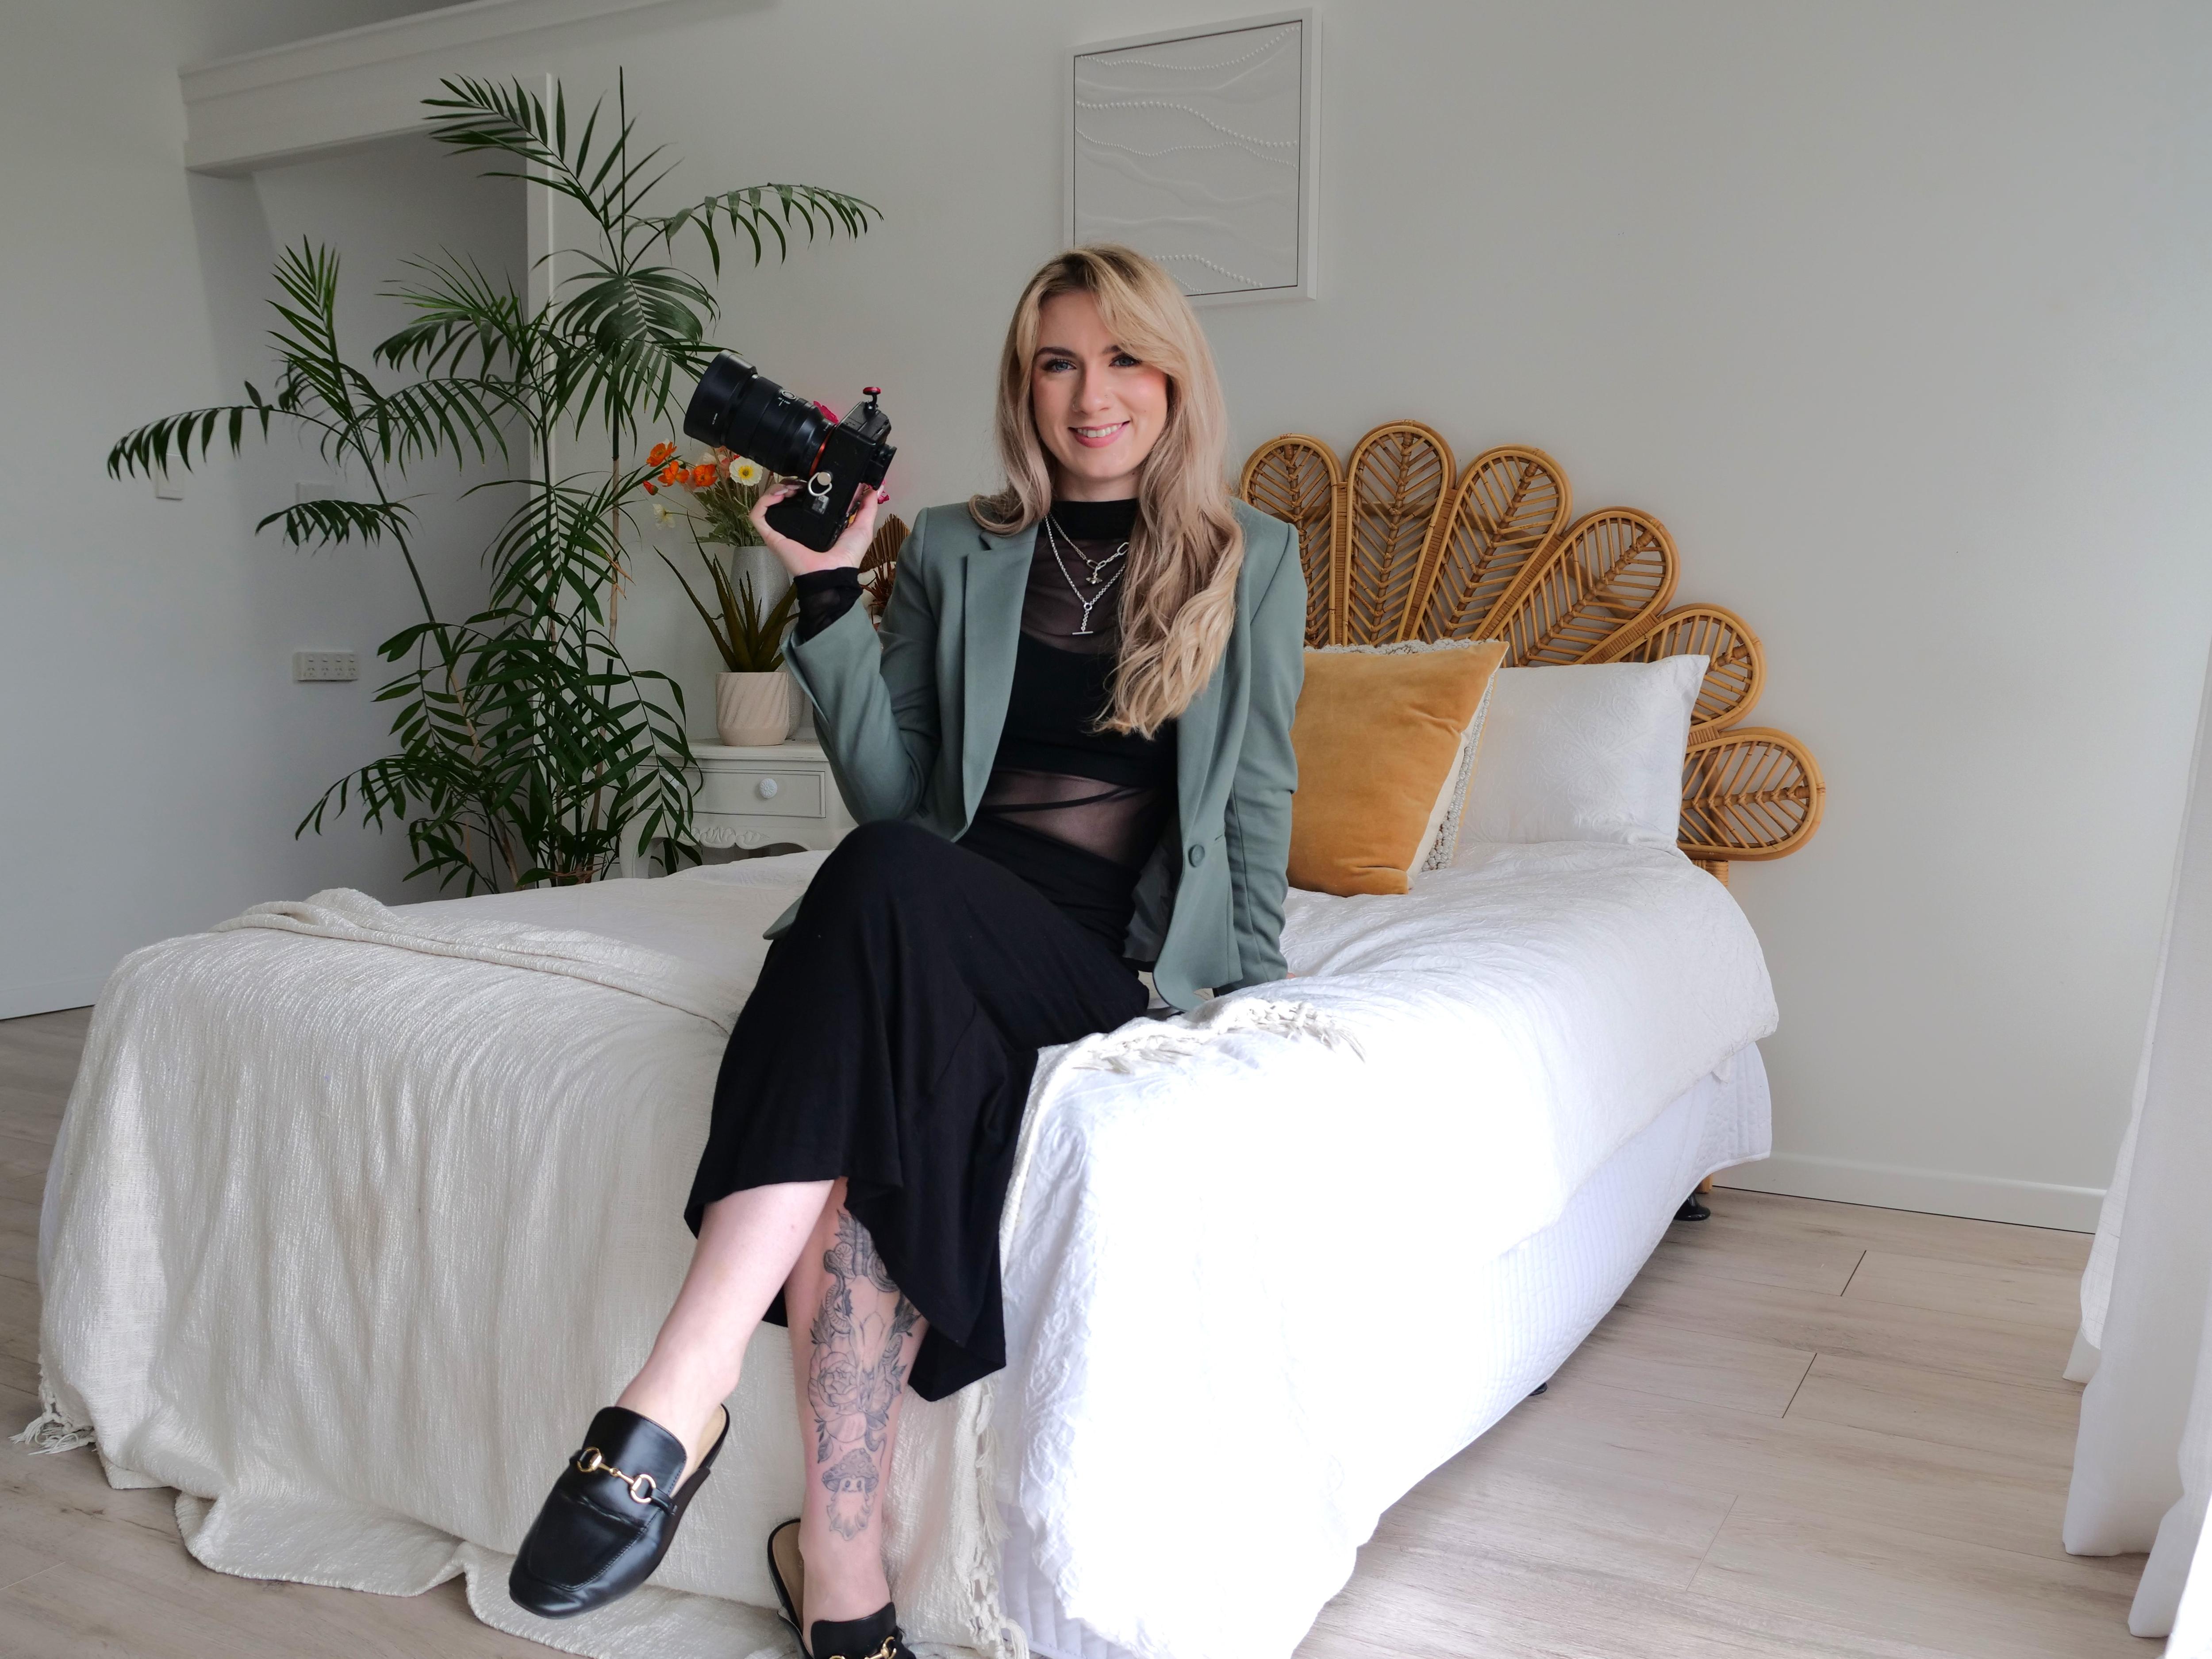 Young woman dressed in black holding a large camera, sitting on a bed and smiling. 